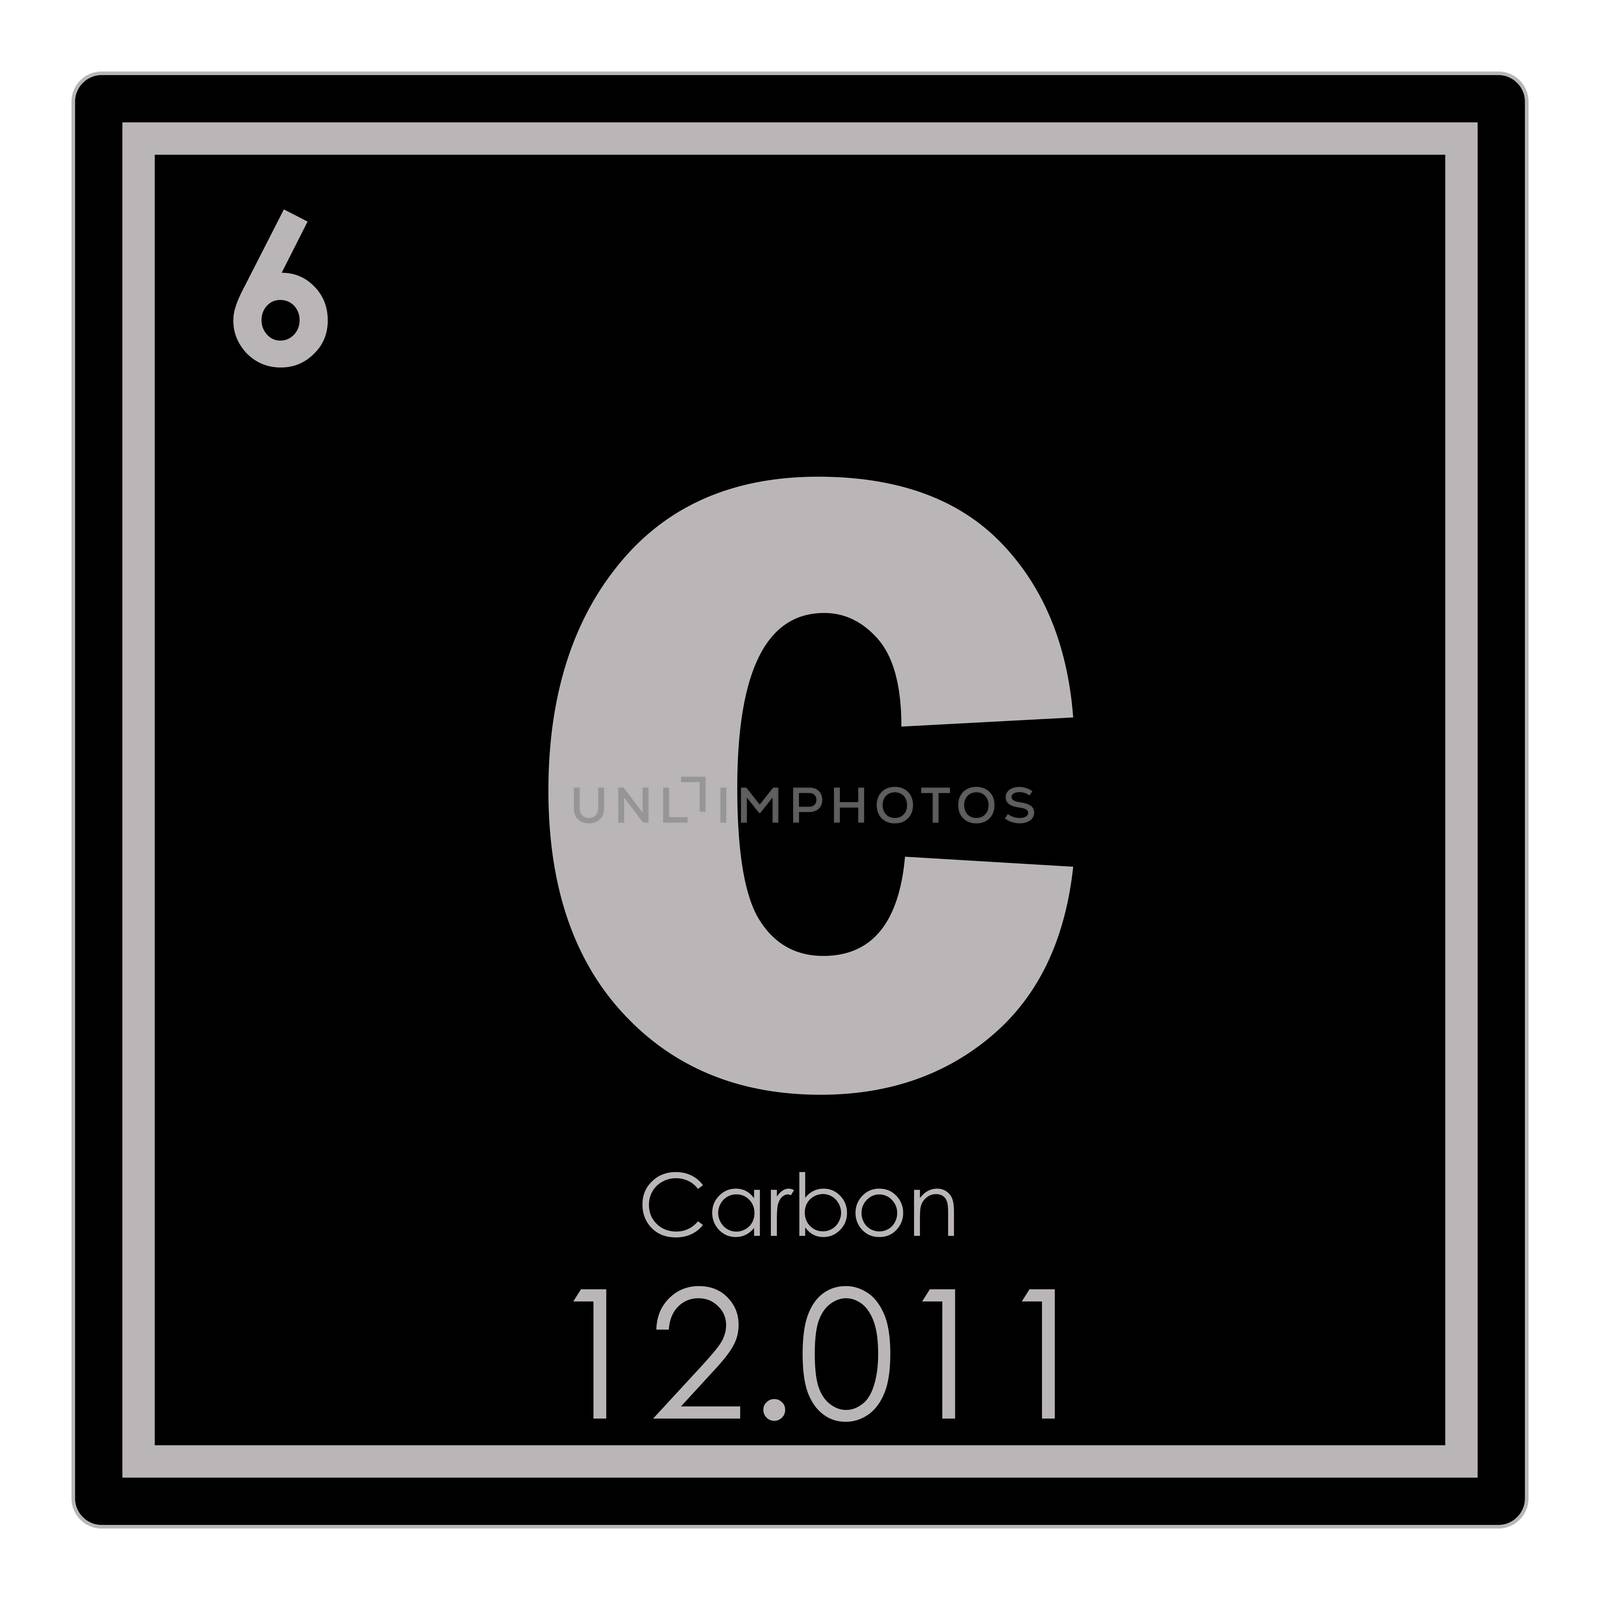 Carbon chemical element by tony4urban